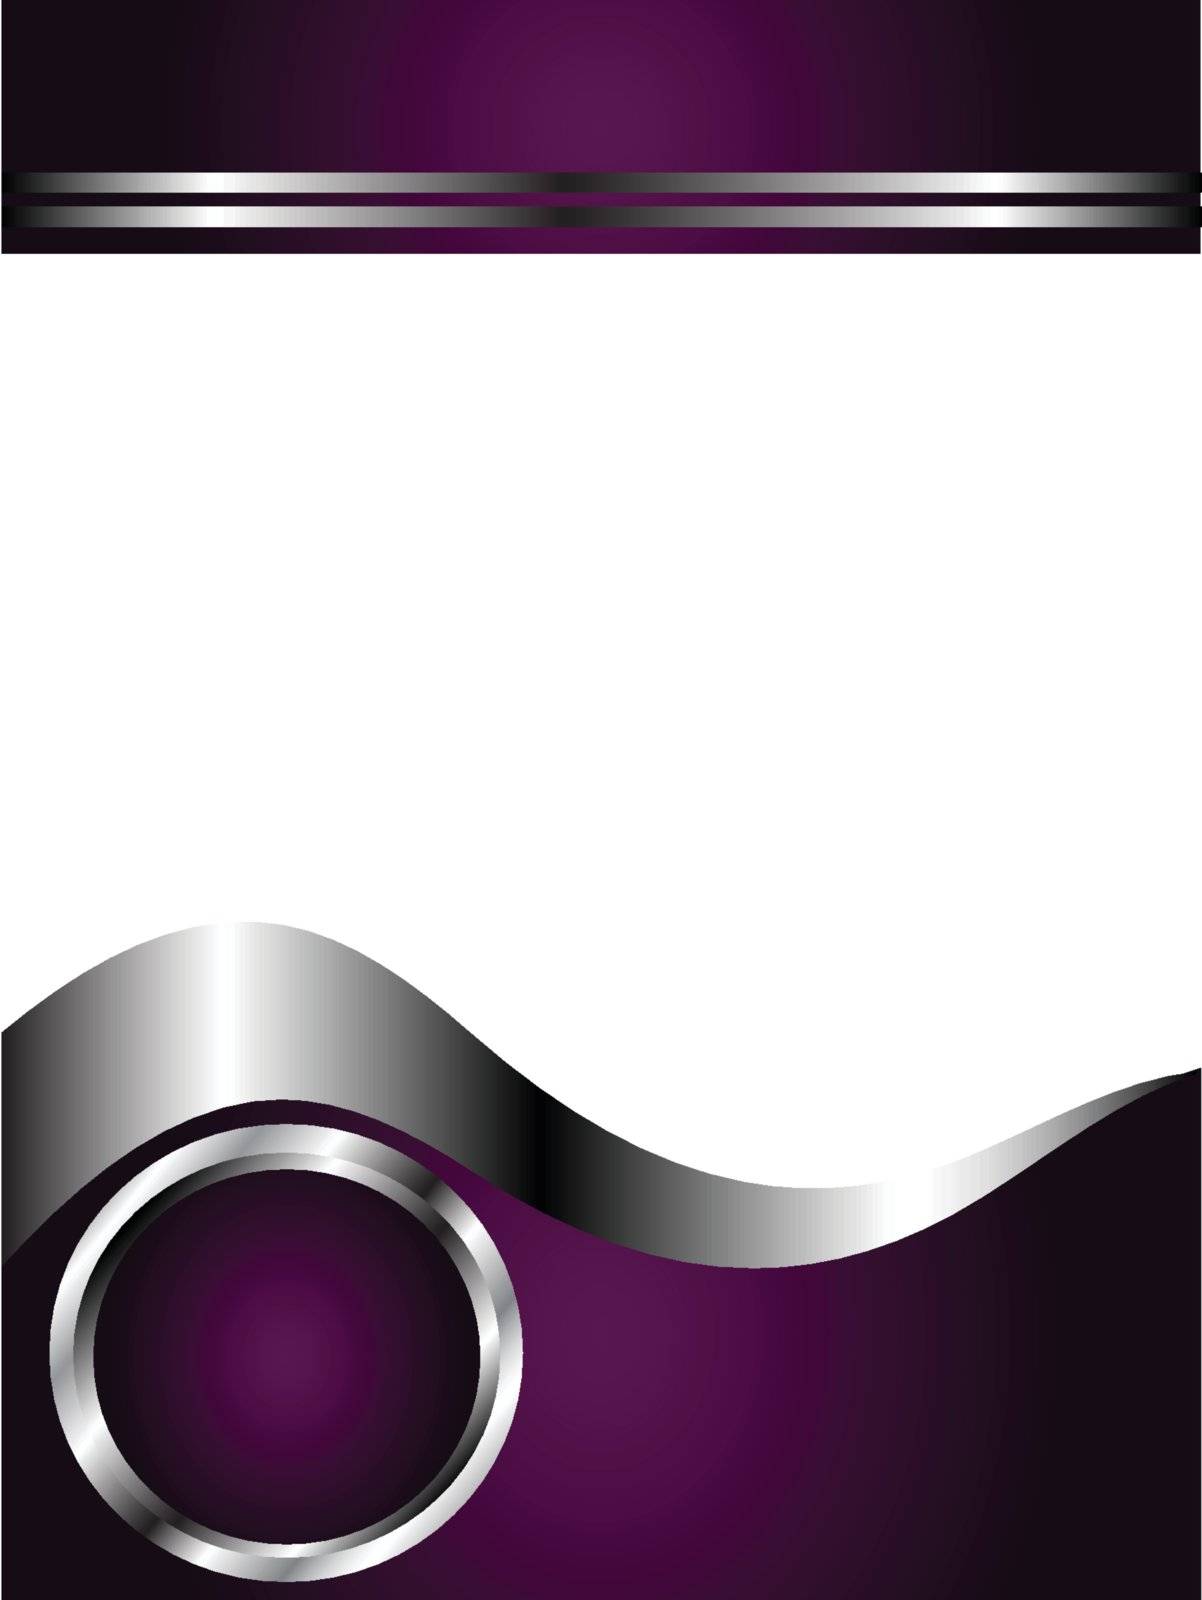 A deep purple and Silver Business card or Background Template